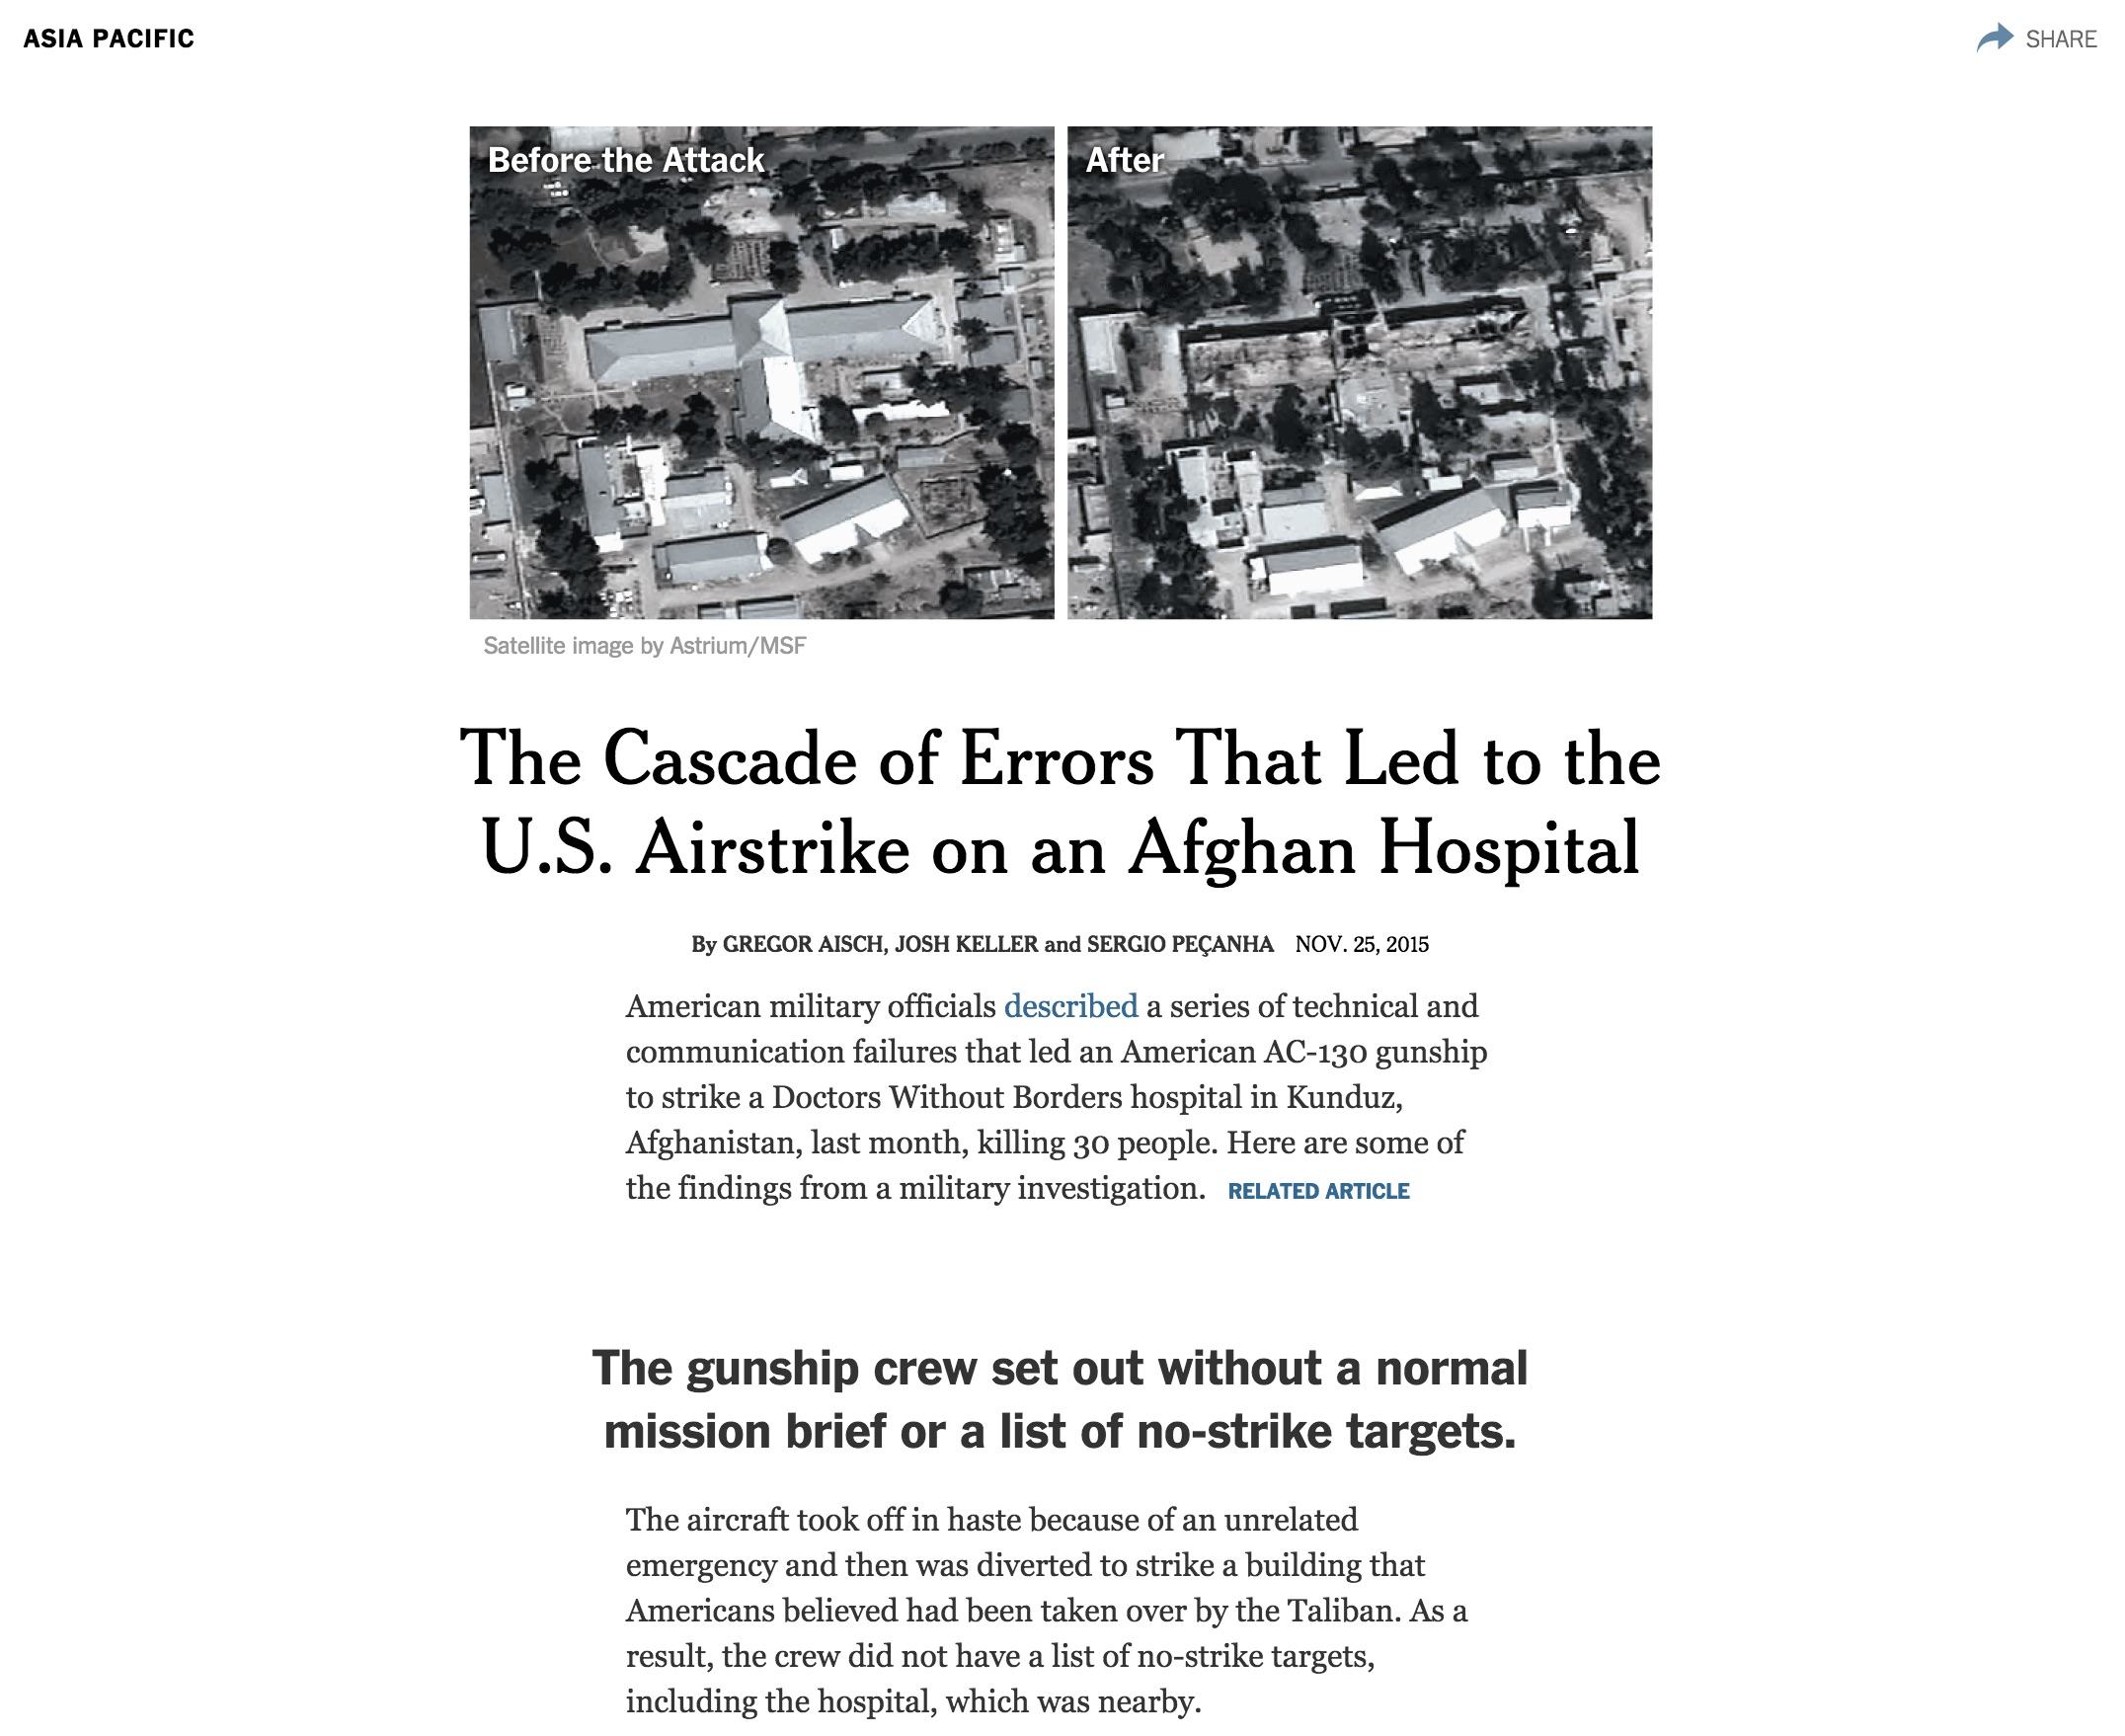 The Cascade of Errors That Led to the U.S. Airstrike on an Afghan Hospital